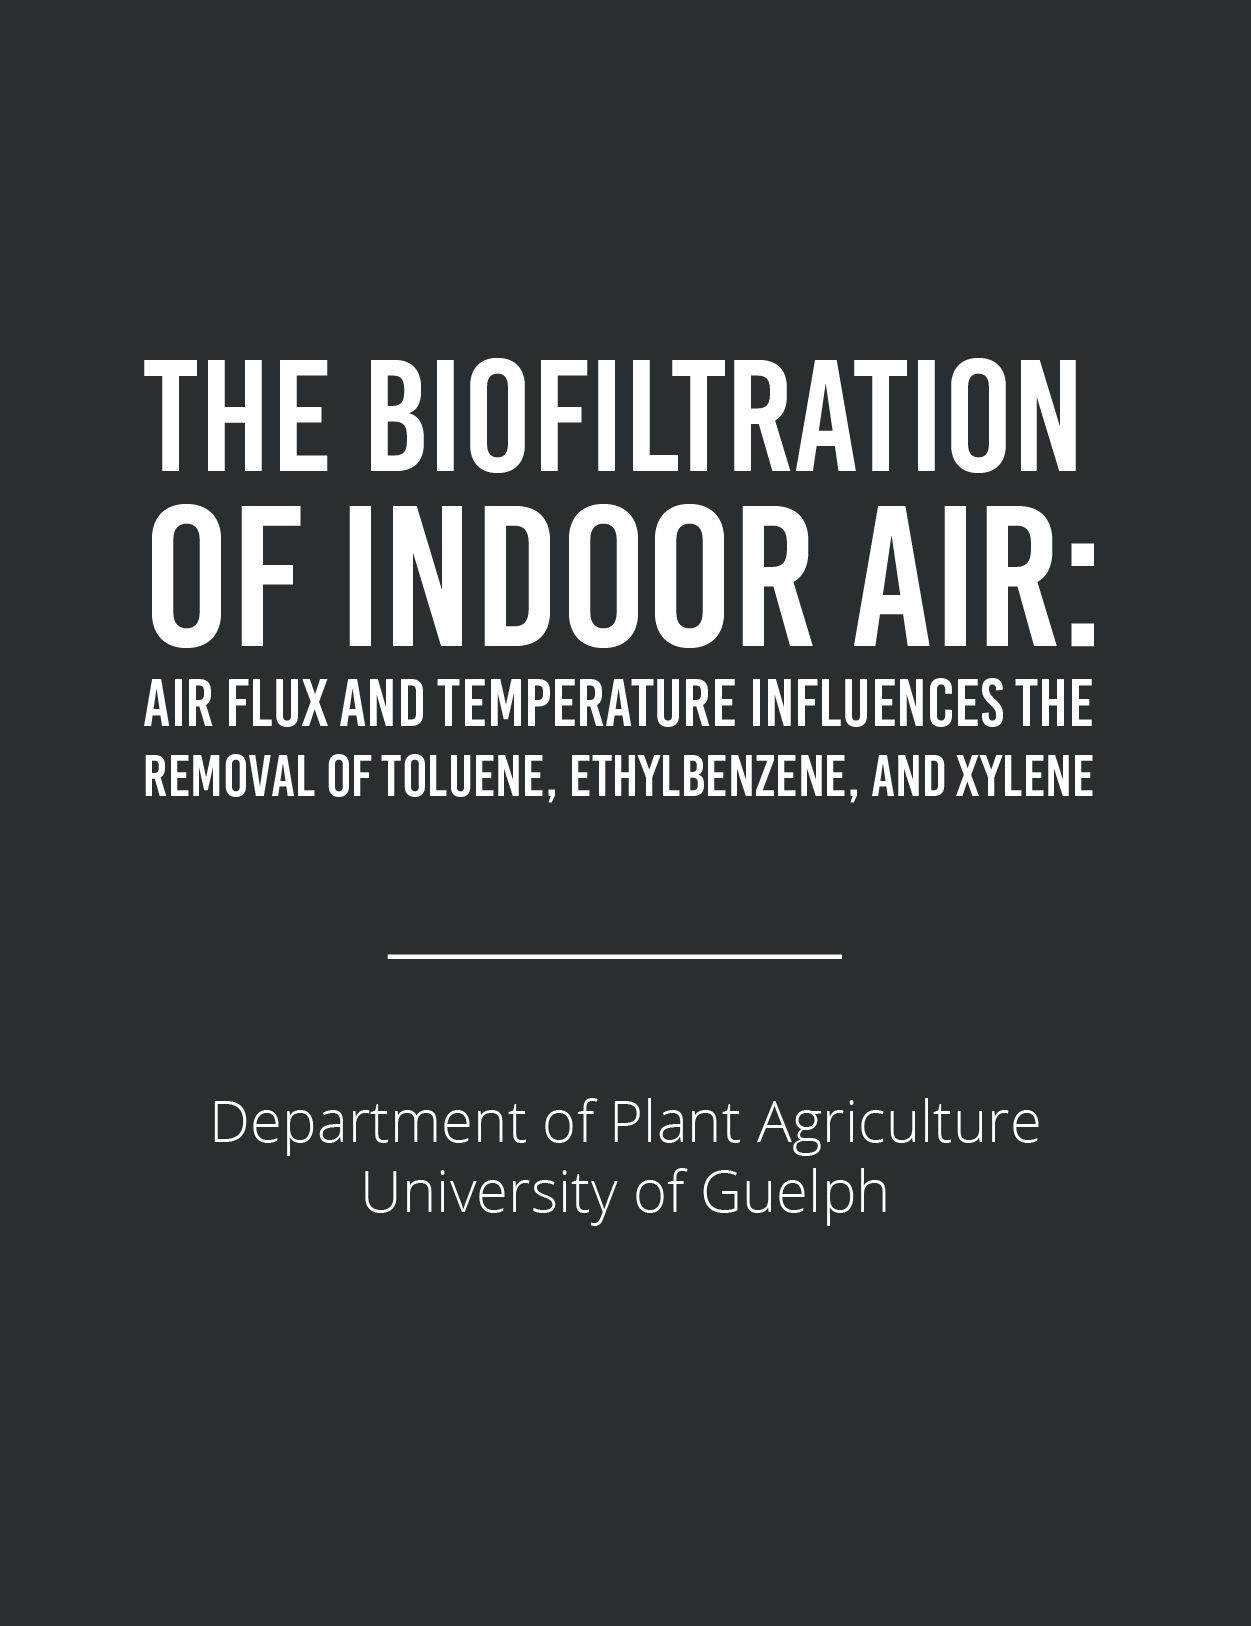 The Biofiltration of Indoor AirFeatured Image